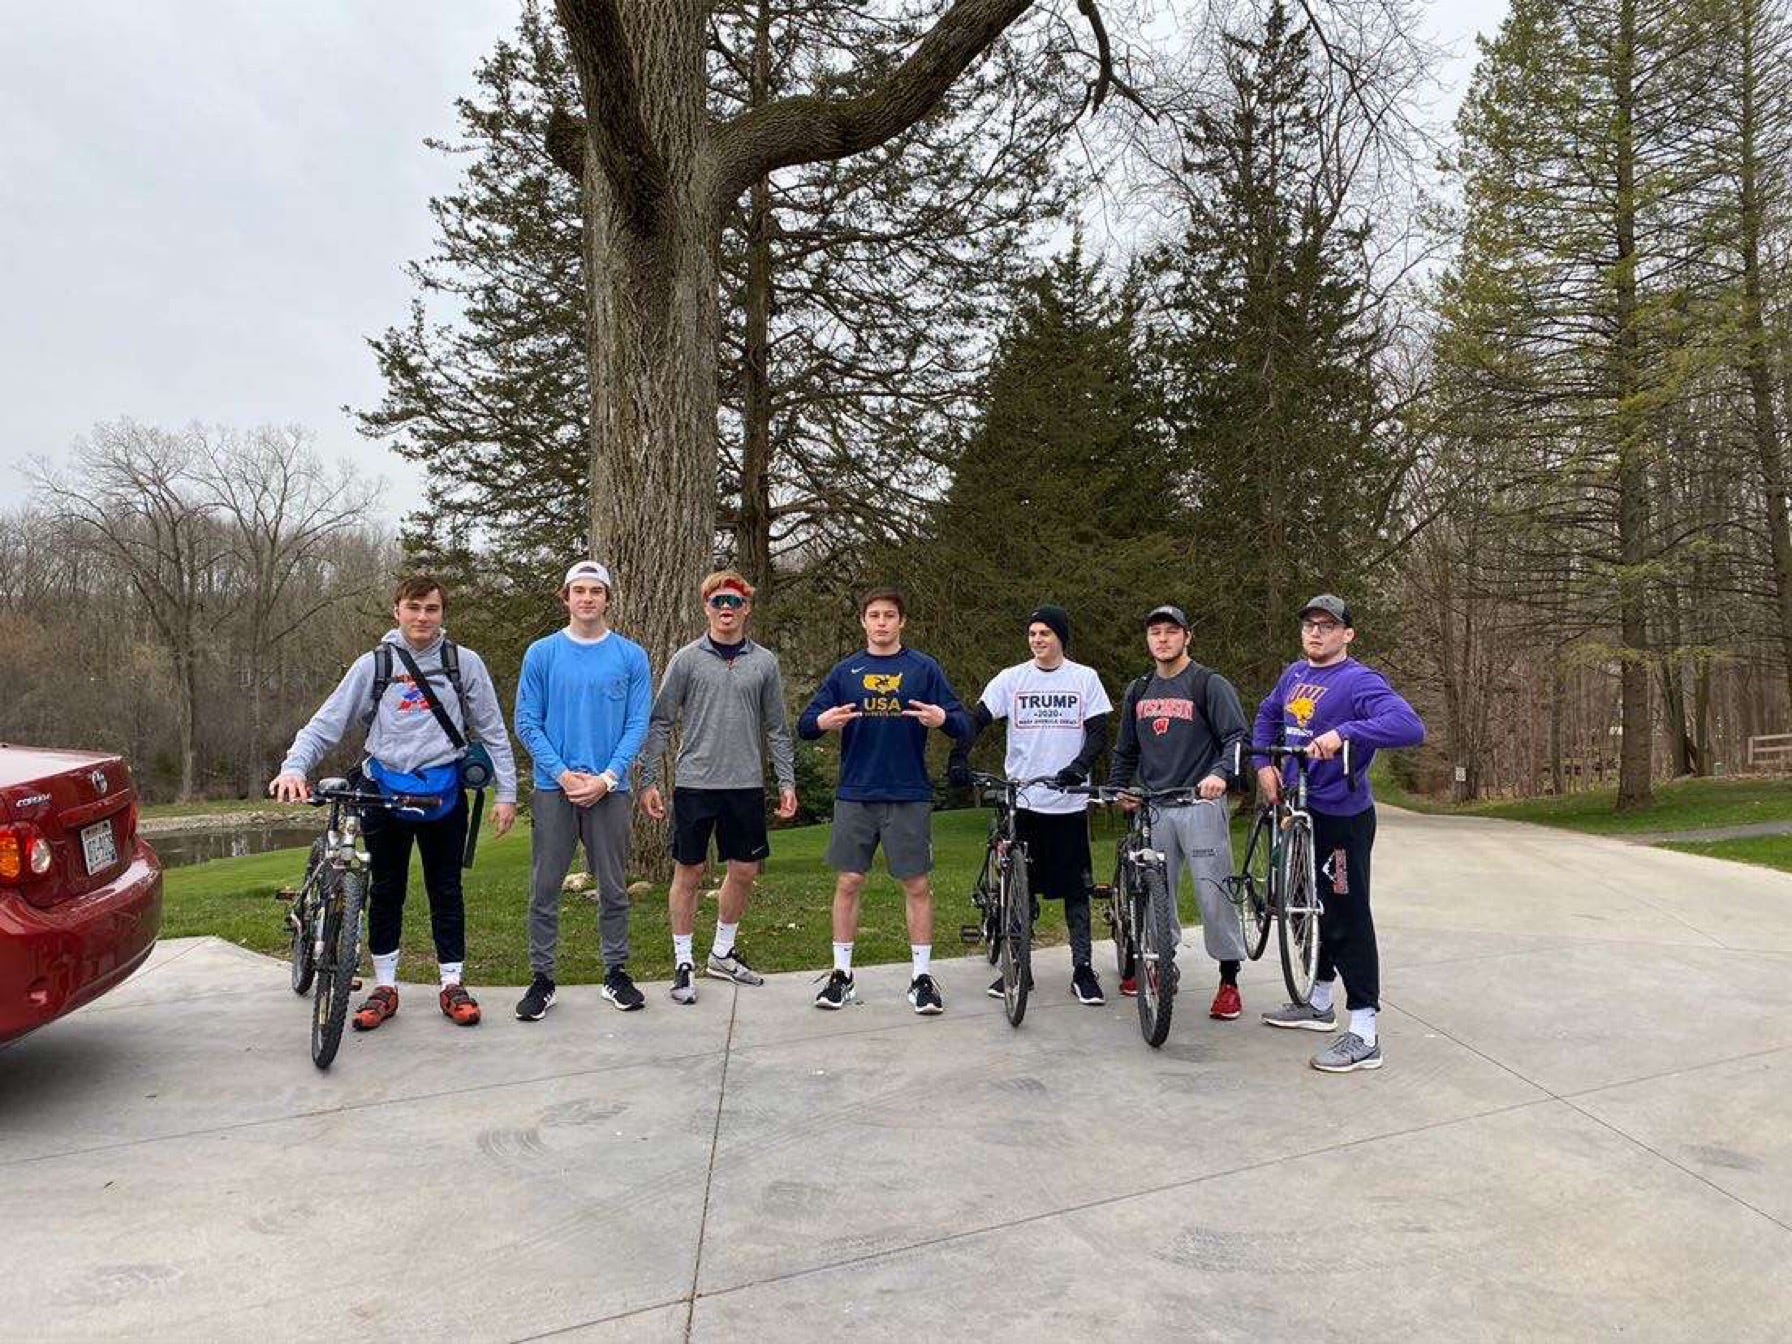 Arrowhead wrestler Keegan O'Toole and some friends recently tried a marathon April 25. O'Toole, along with fellow Arrowhead wrestlers Jack Ganos and Jeffrey Pfannerstill ran, while Noah Mulvaney, Jonah Luther, Josh Otto and Parker Keckeisen rode their bikes to provide support. Pictured before the marathon, from left, Mulvaney, Pfannerstill, Ganos, O'Toole, Luther, Otto and Keckeisen.